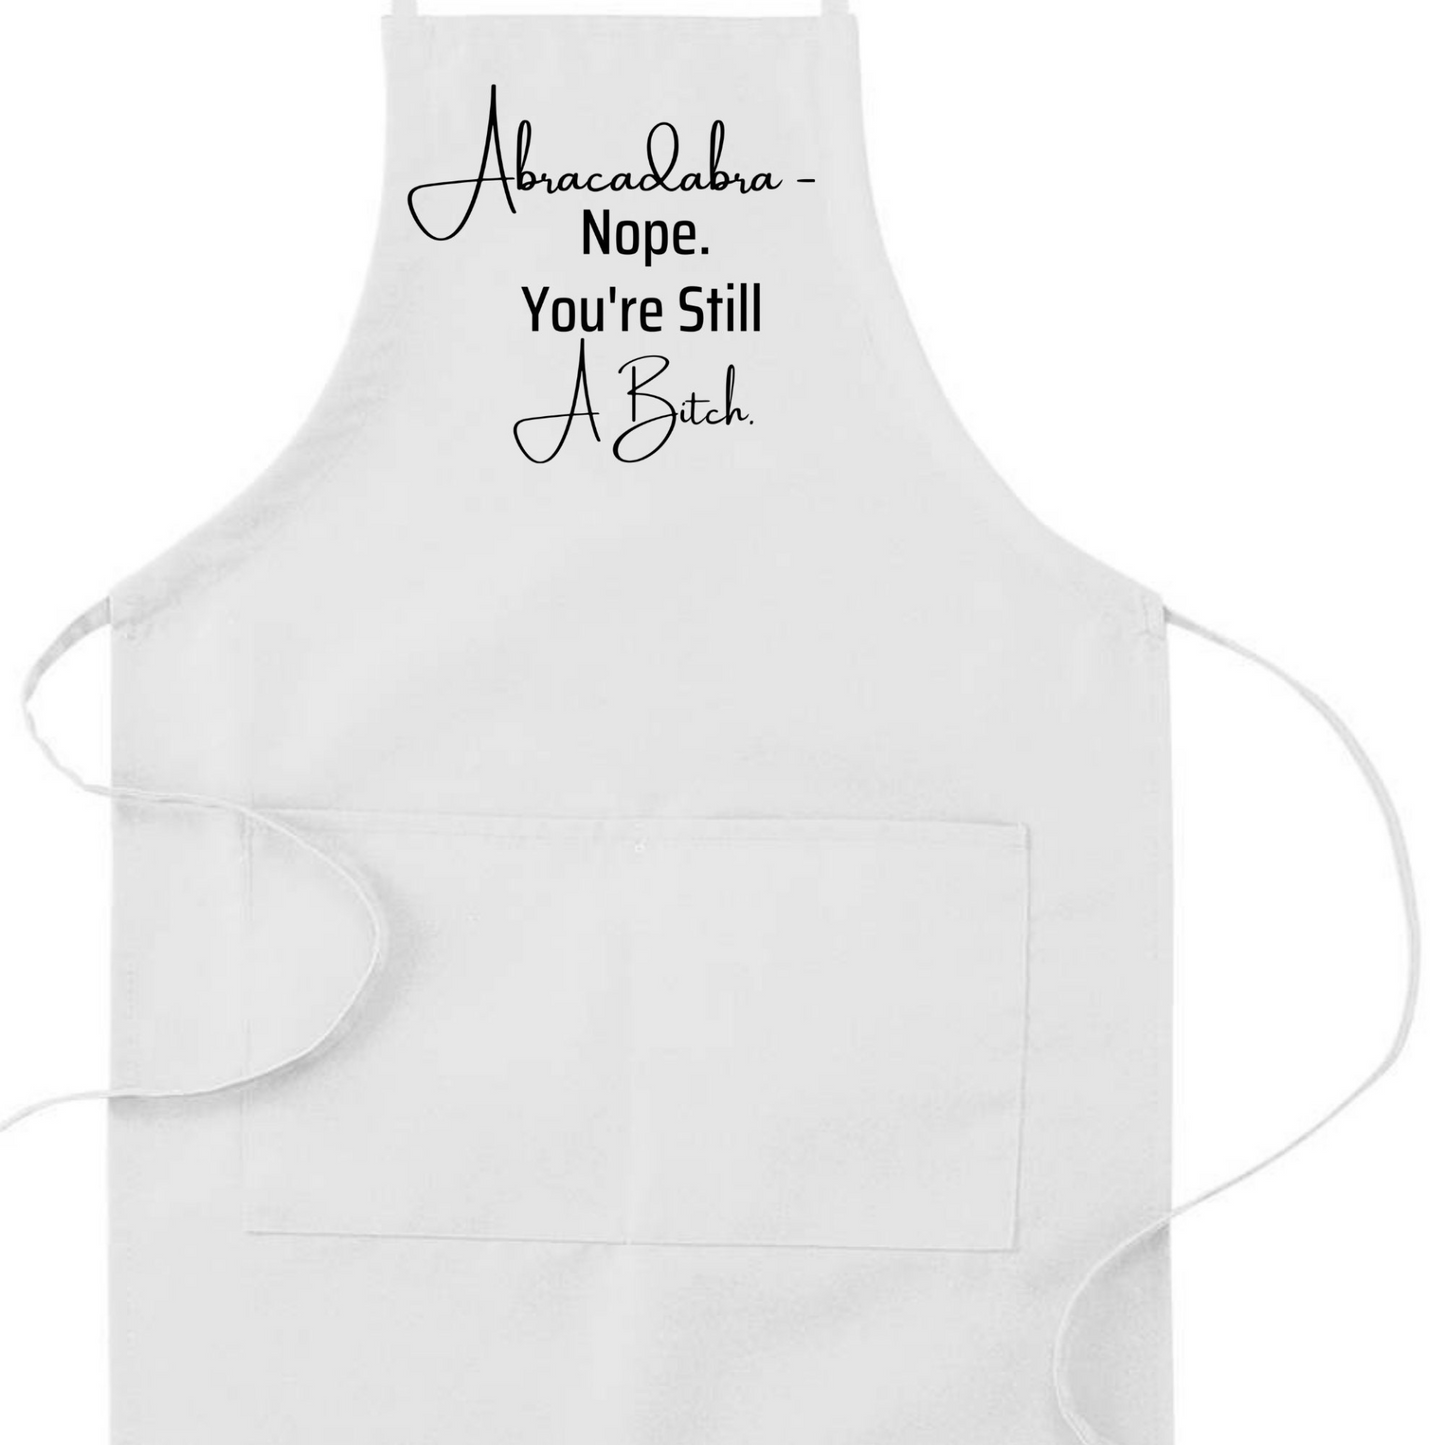 Abracadabra Nope You're Still A Bitch Humorous Apron | Funny Adjustable Kitchen or BBQ Apron | Perfect Housewarming Gift for Her, Goodies N Stuff